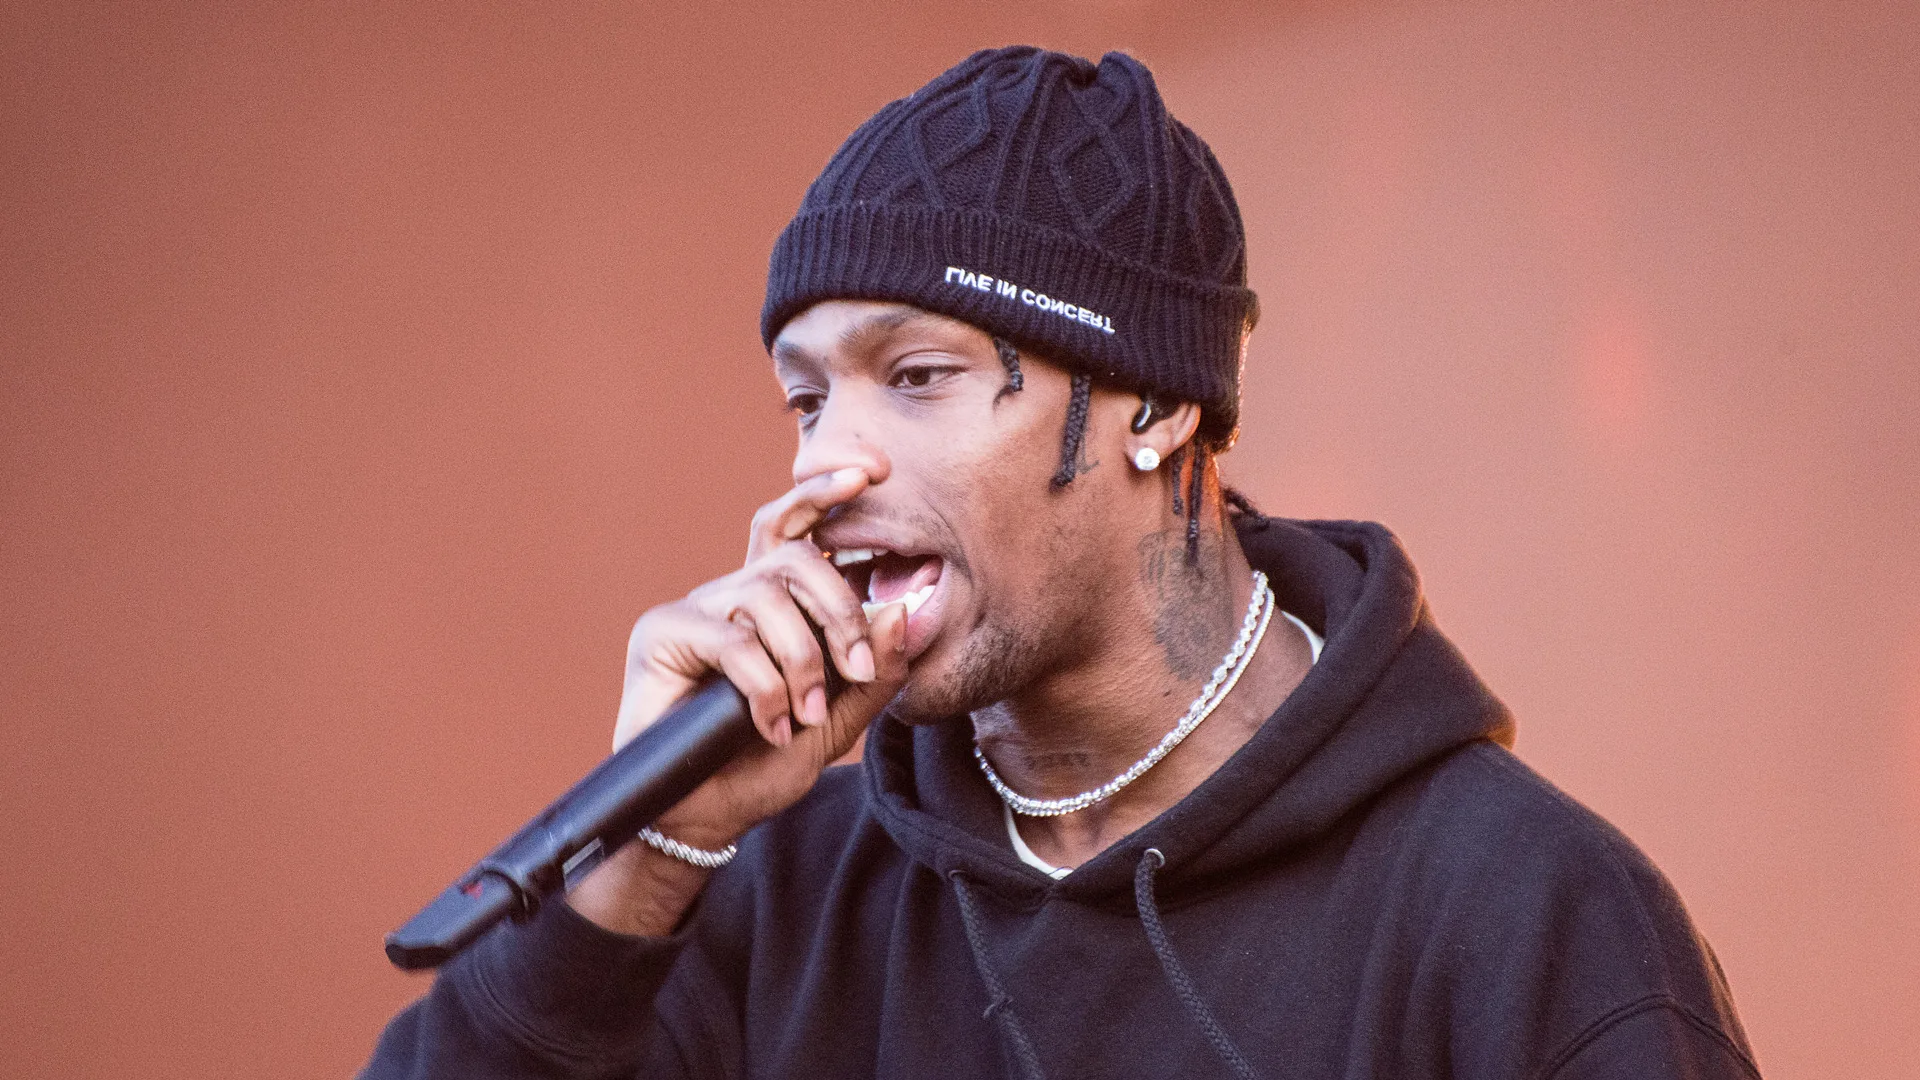 A photograph of Travis Scott singing into a microphone wearing a black beanie hat and hoodie against a terracotta background